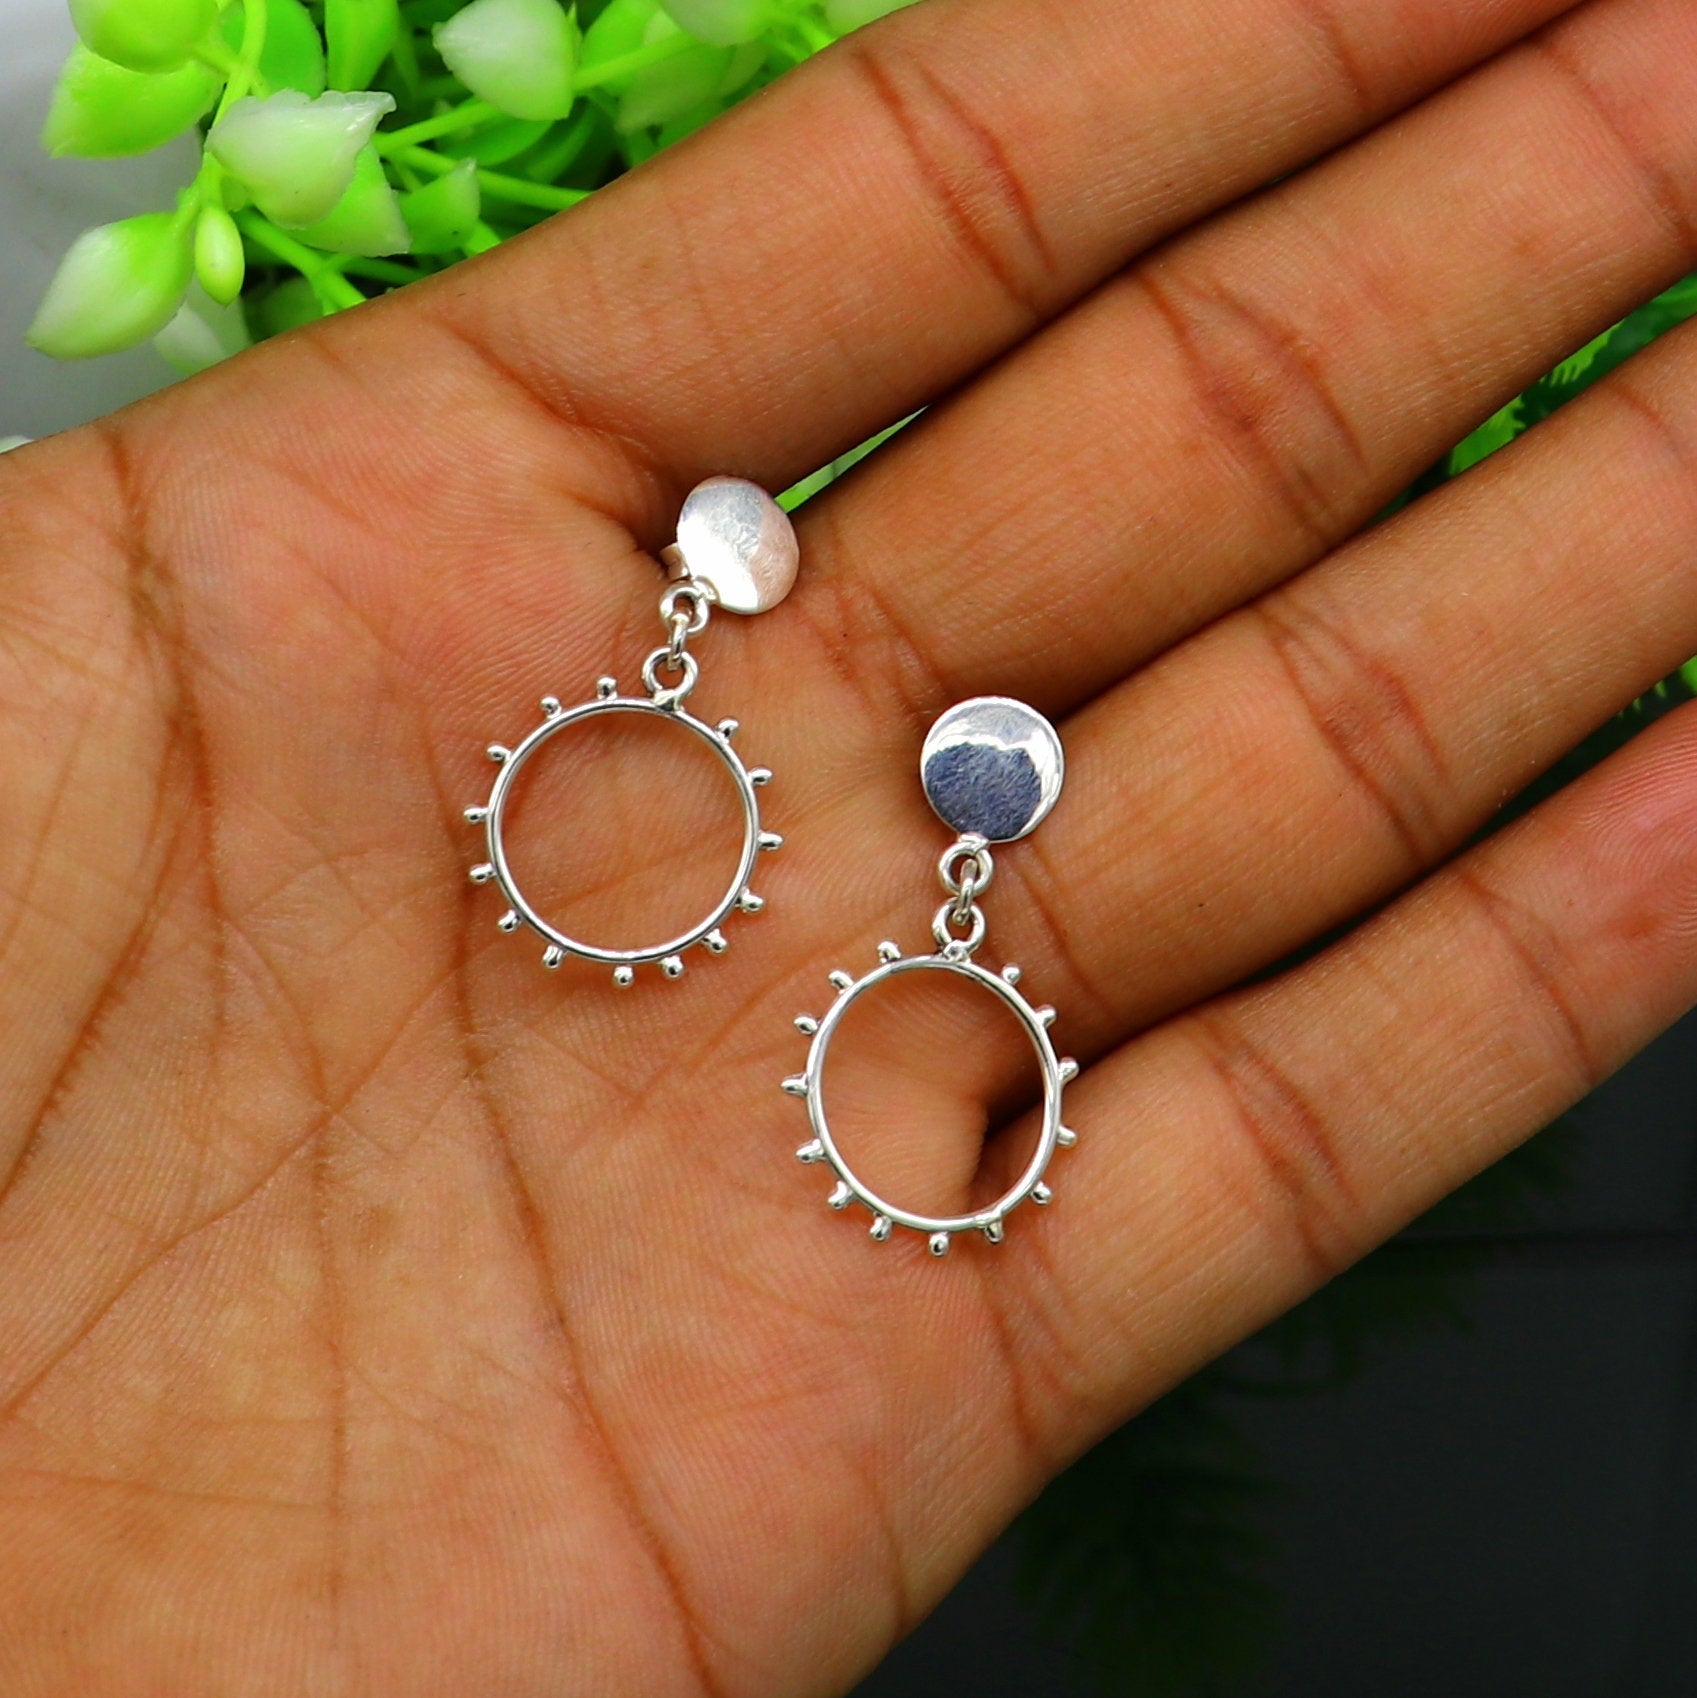 Pure 925 sterling silver customized drop dangle design fabulous hoops earring, best girl's gifting charm earring jewelry from India ear690 - TRIBAL ORNAMENTS